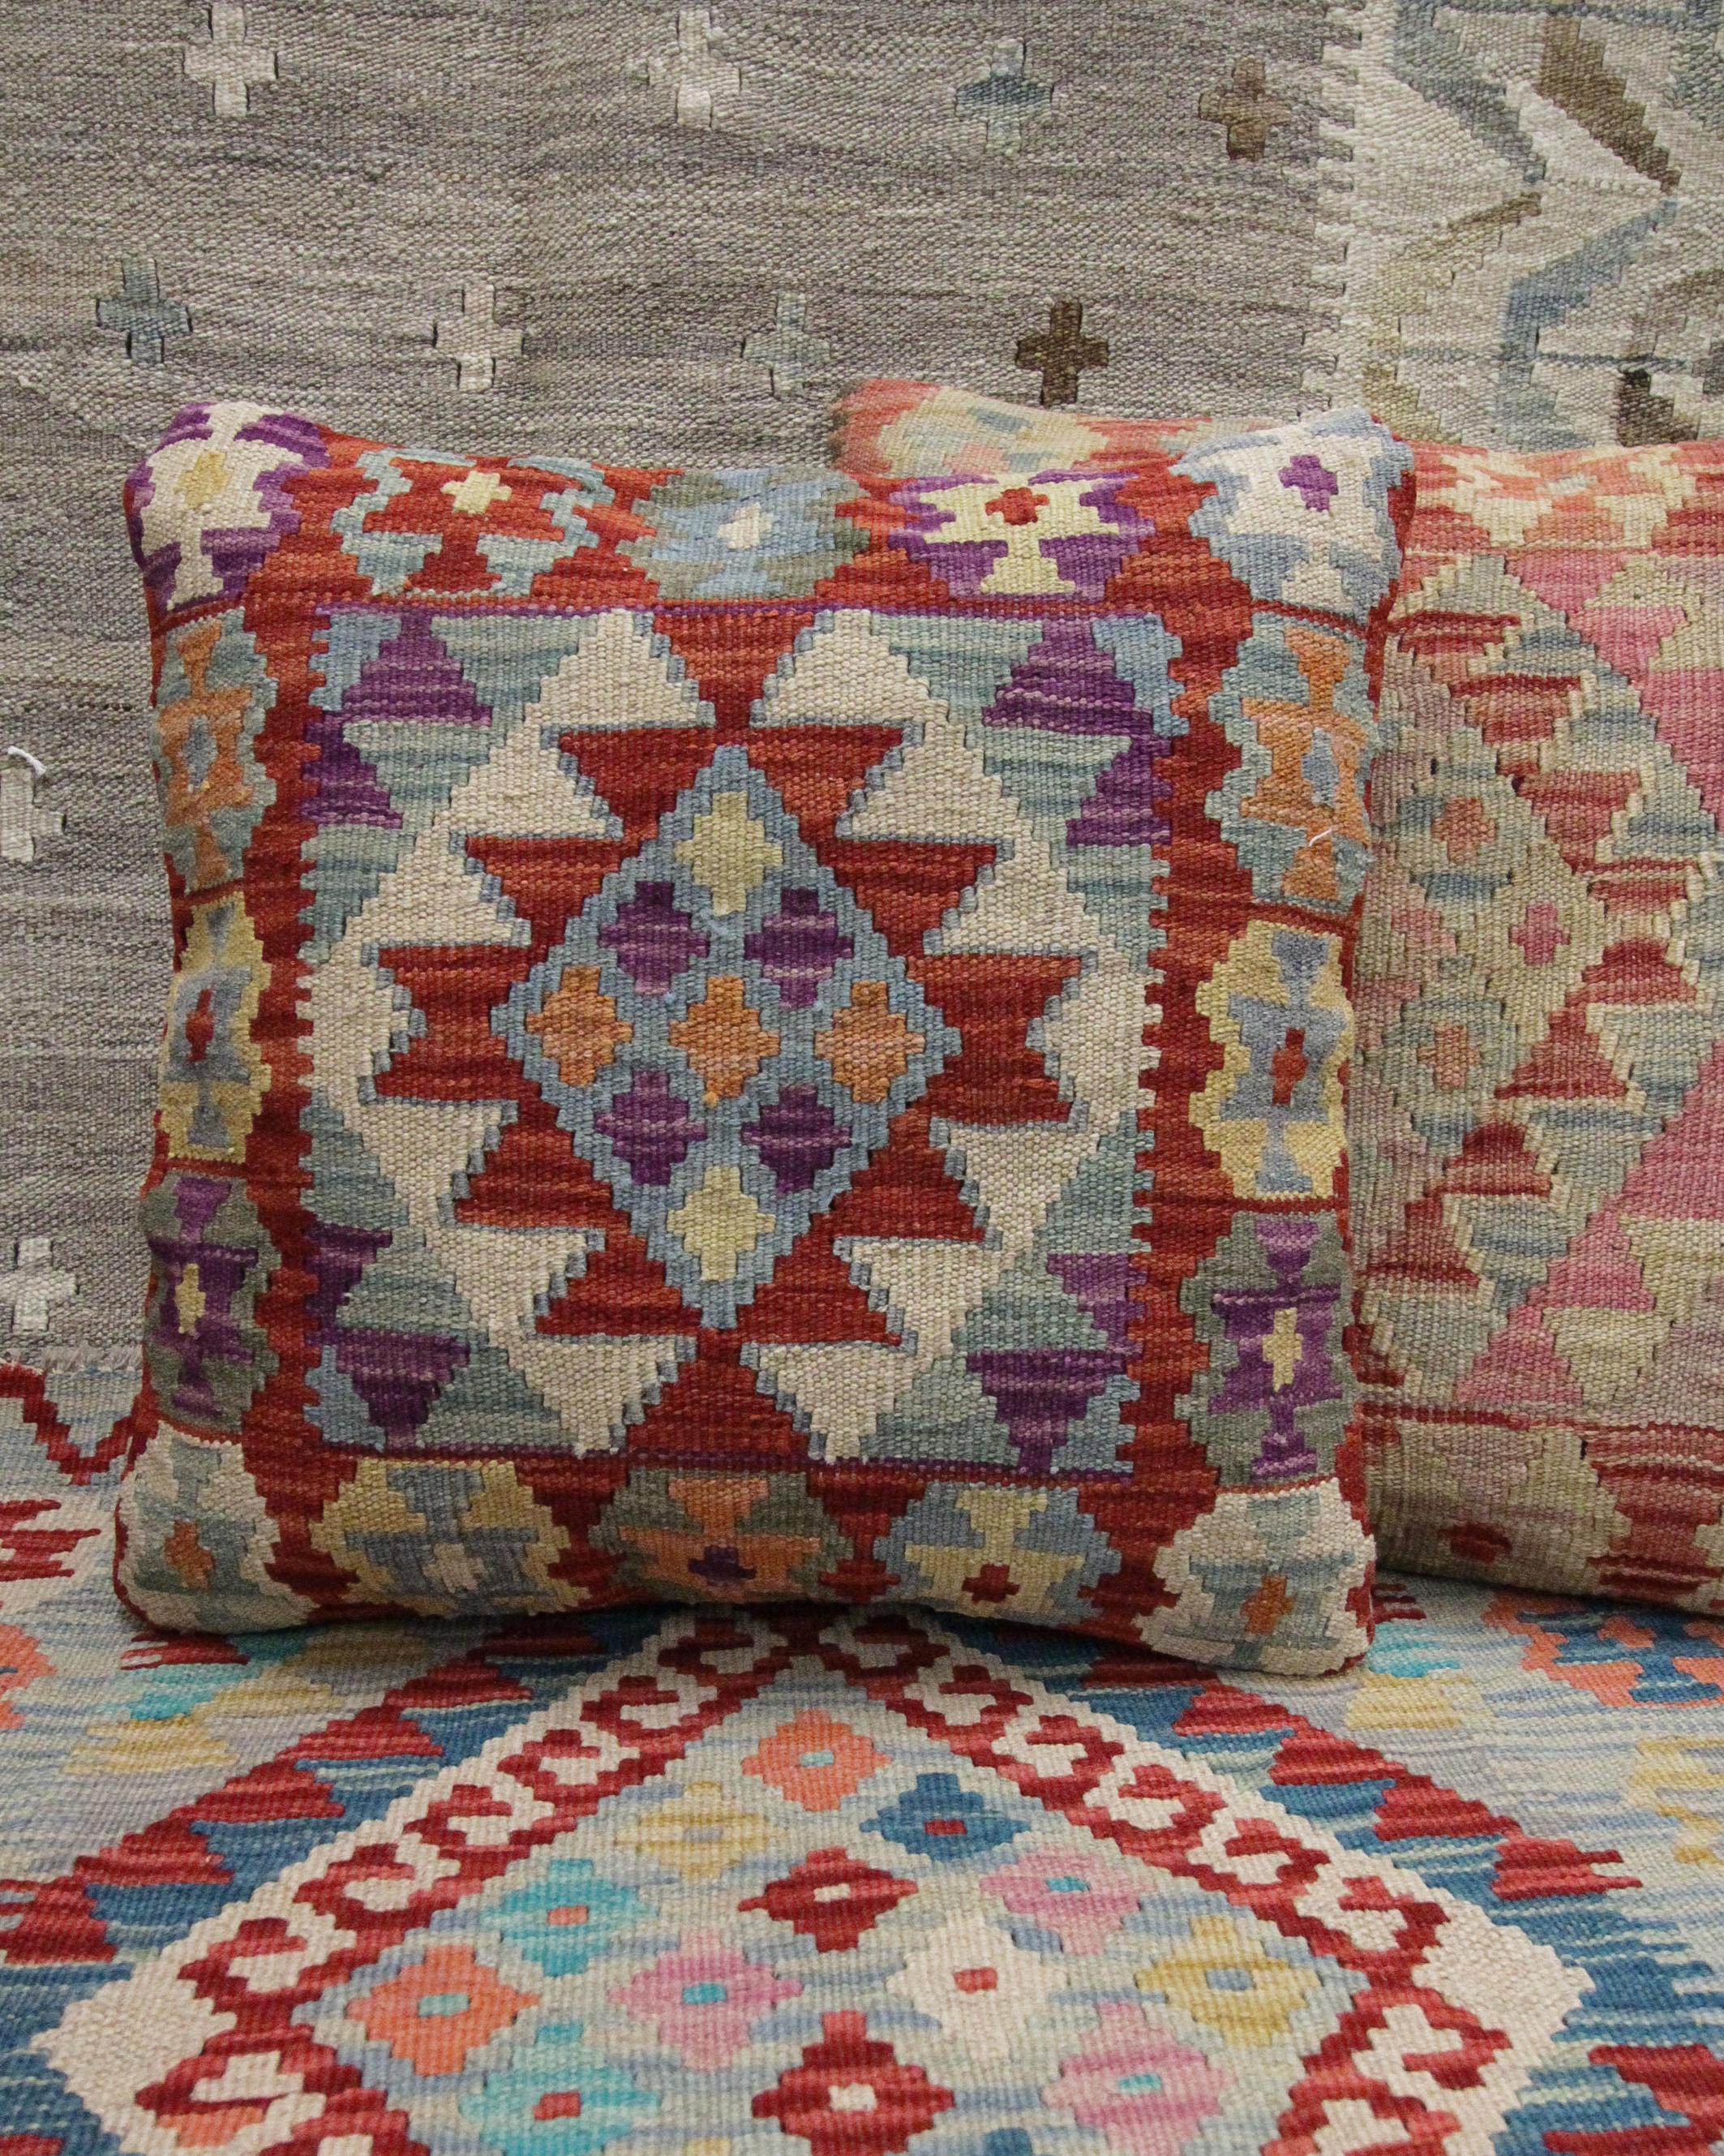 Hand-Knotted Blush Red Wool Kilim Cushion Cover Handwoven Geometric Scatter Cushion For Sale